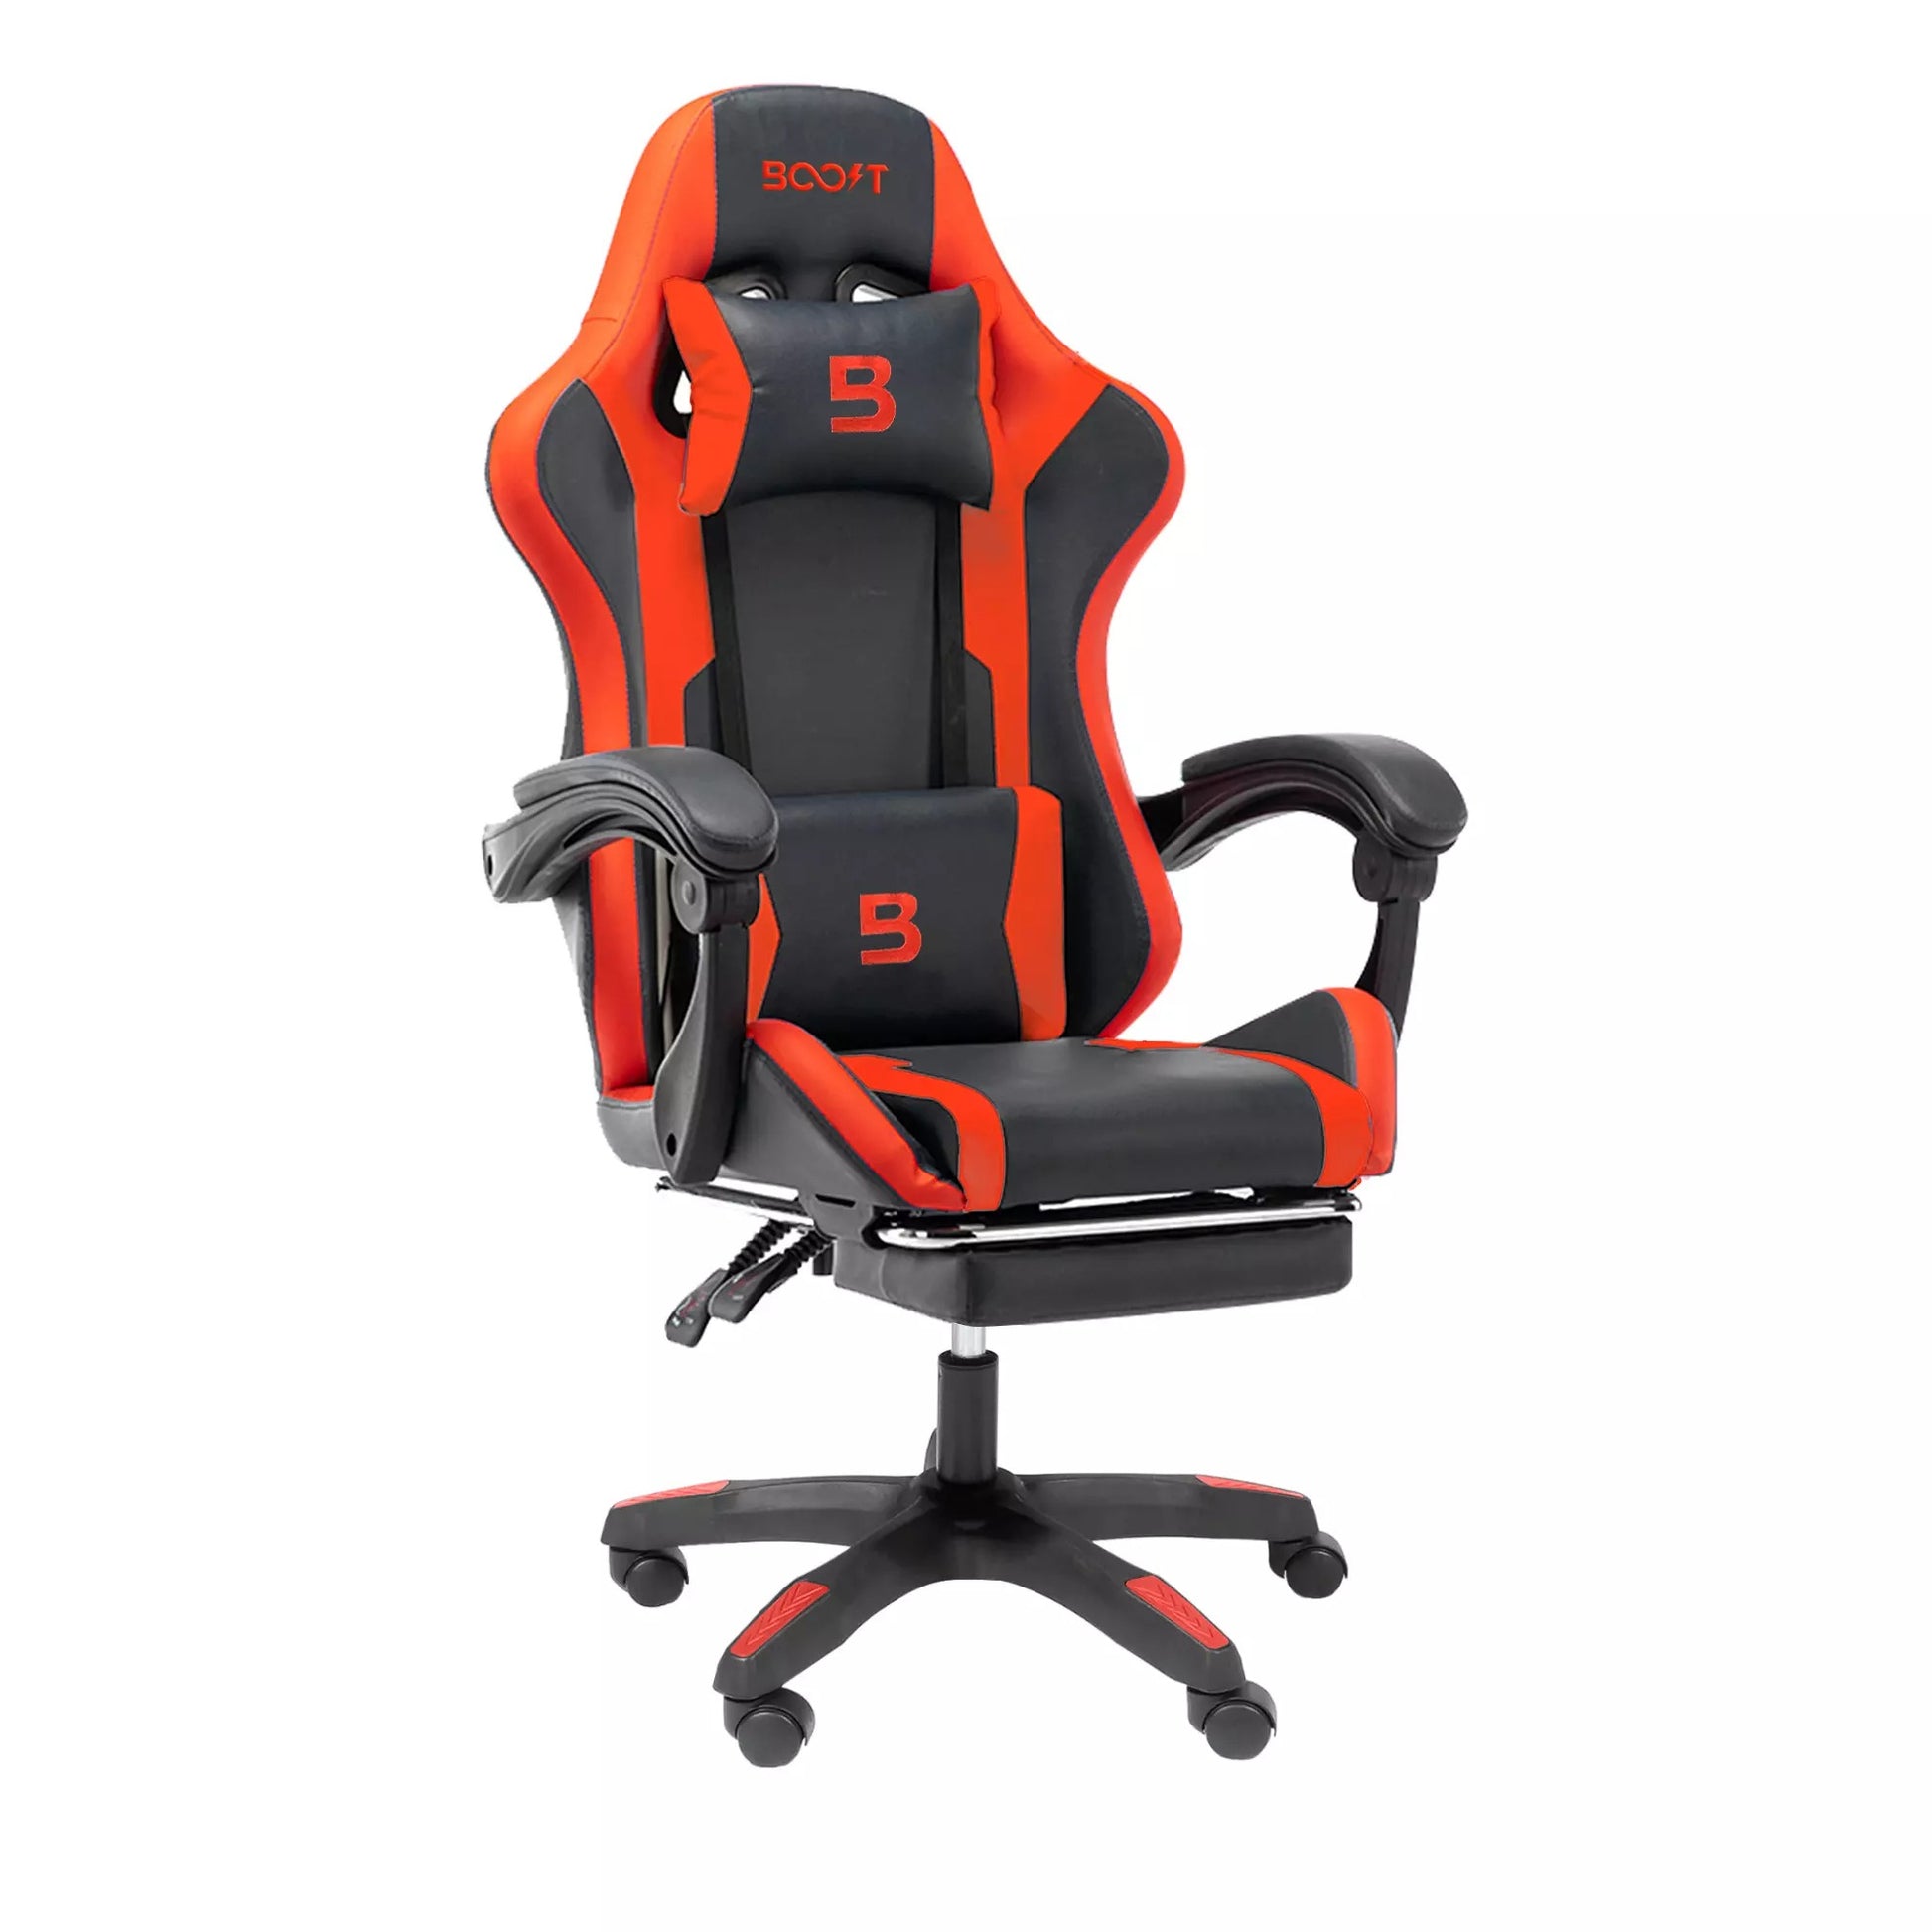 Red Color Boost Surge Gaming Chair Price in Pakistan